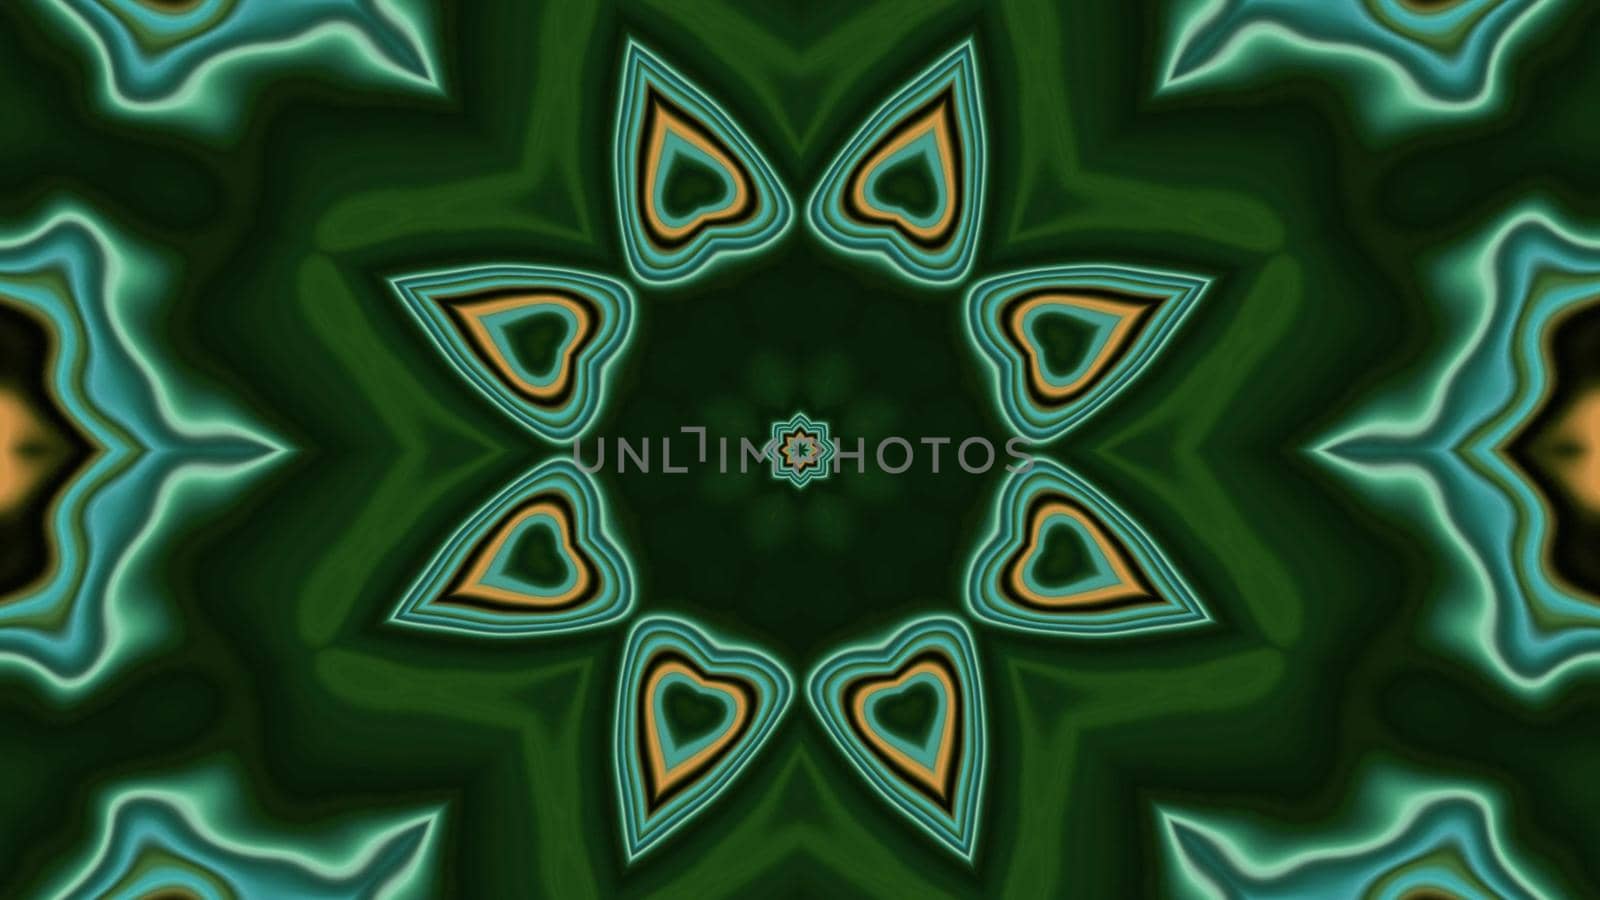 3d illustration of 4K UHD abstract background of symmetric star shaped corridor with kaleidoscopic pattern with neon colors